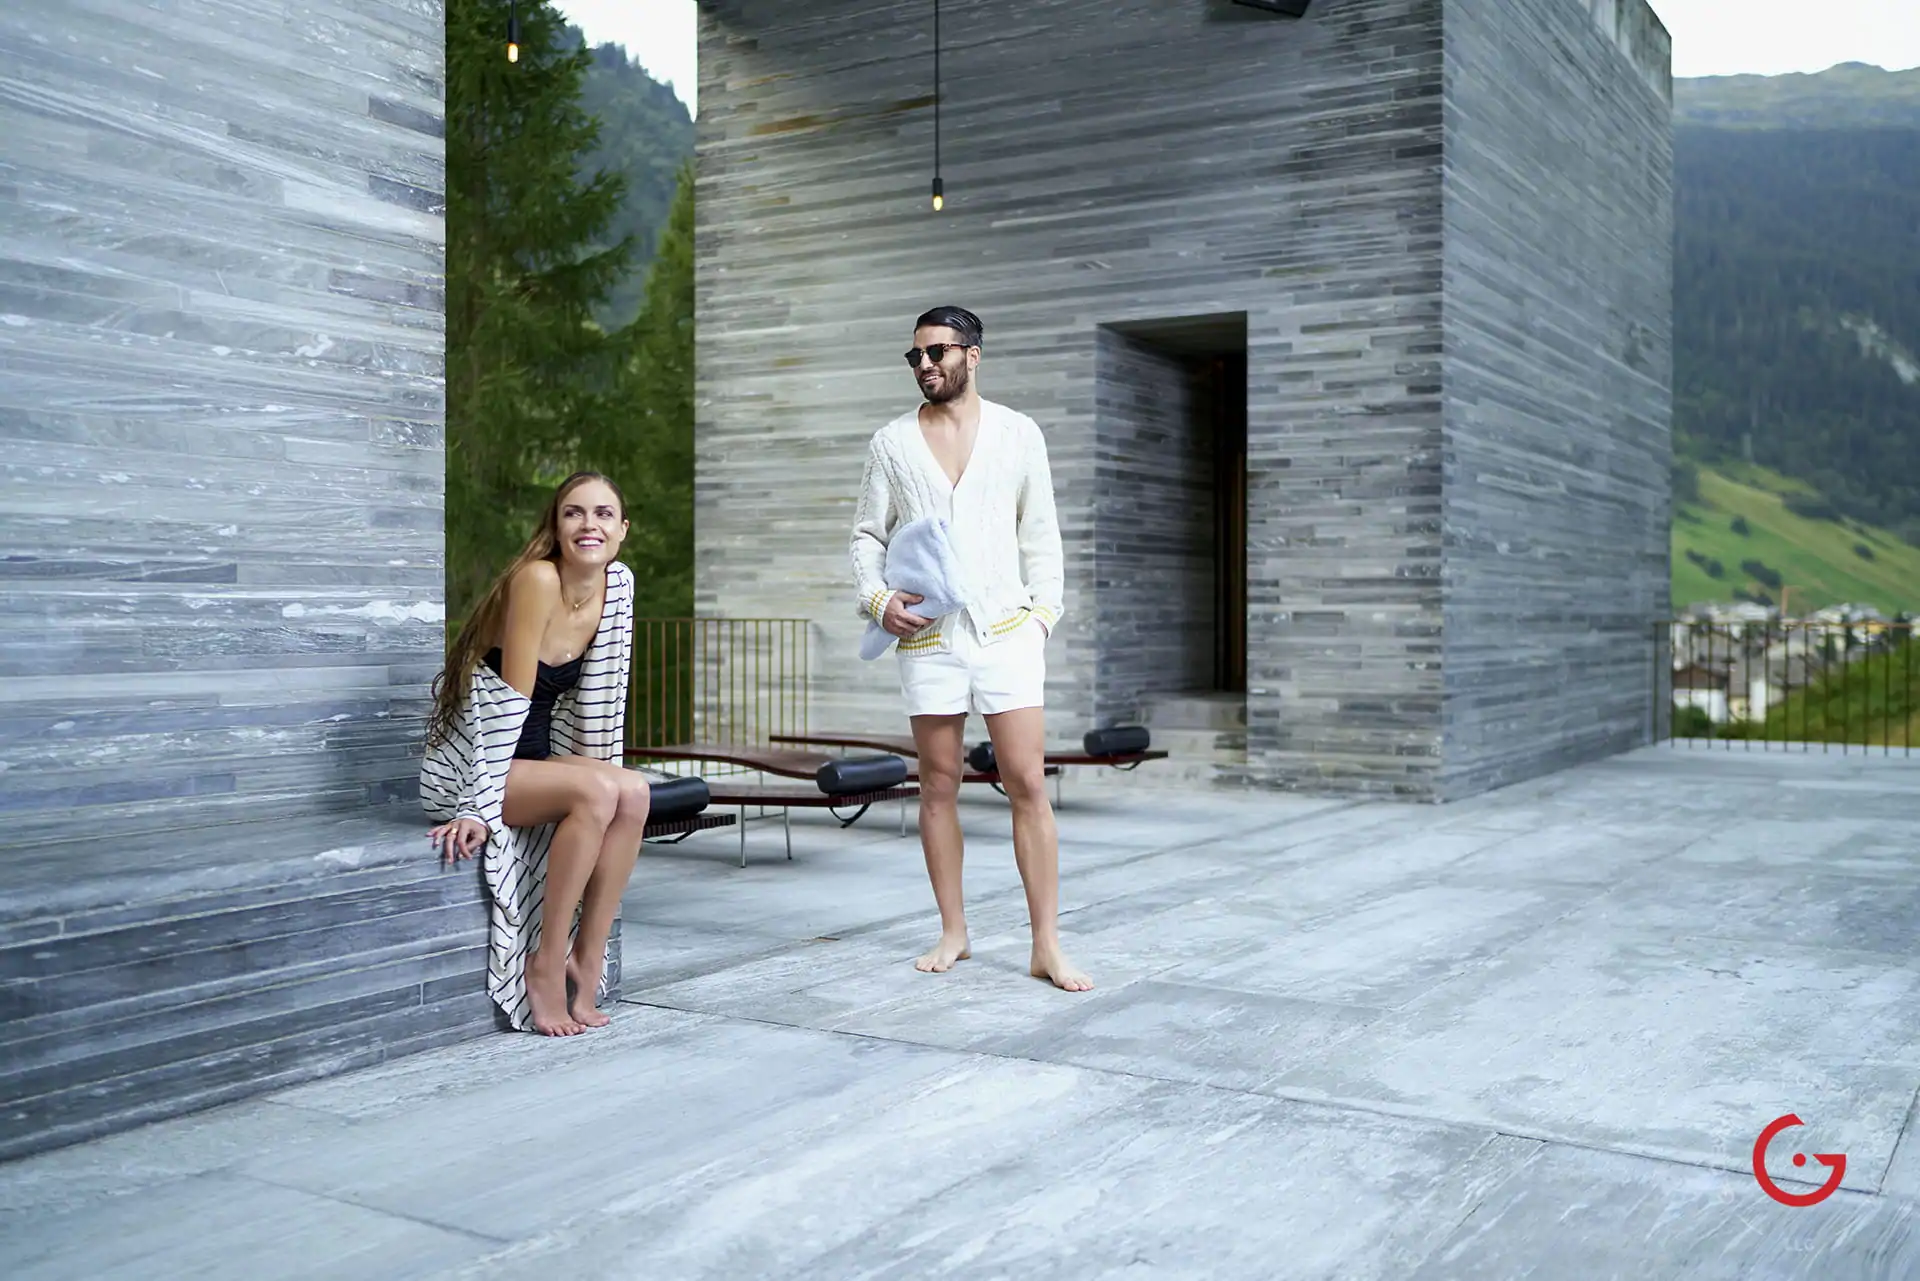 Happy Couple at 7132 Hotel Therme Vals Spa Photography - Pritzker Prize Award Winning Architecture Peter Zumthor